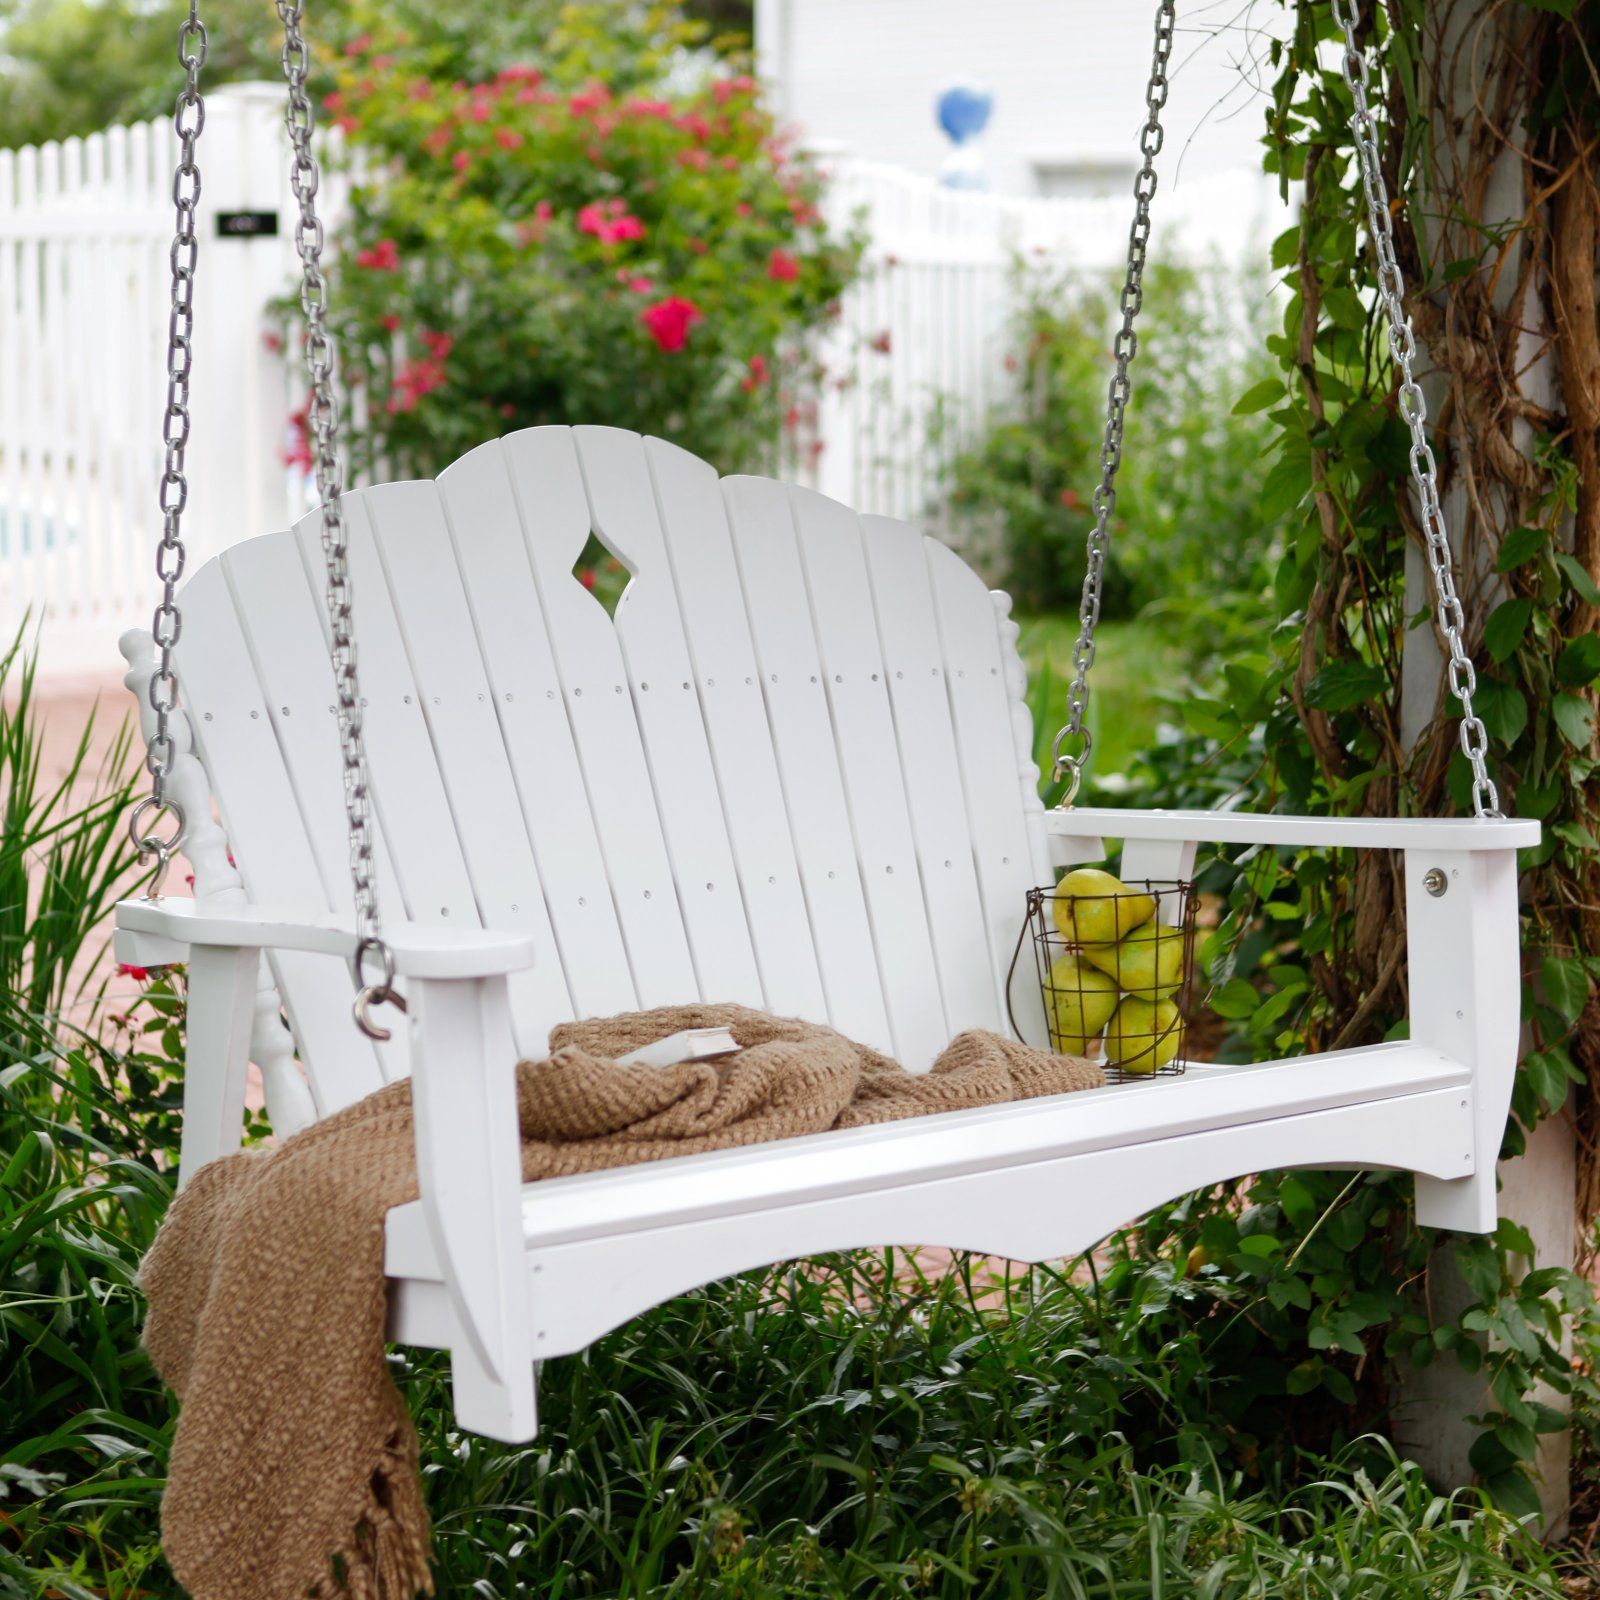 Every Southern Home has an old fashioned swing........Southern California that is!...........